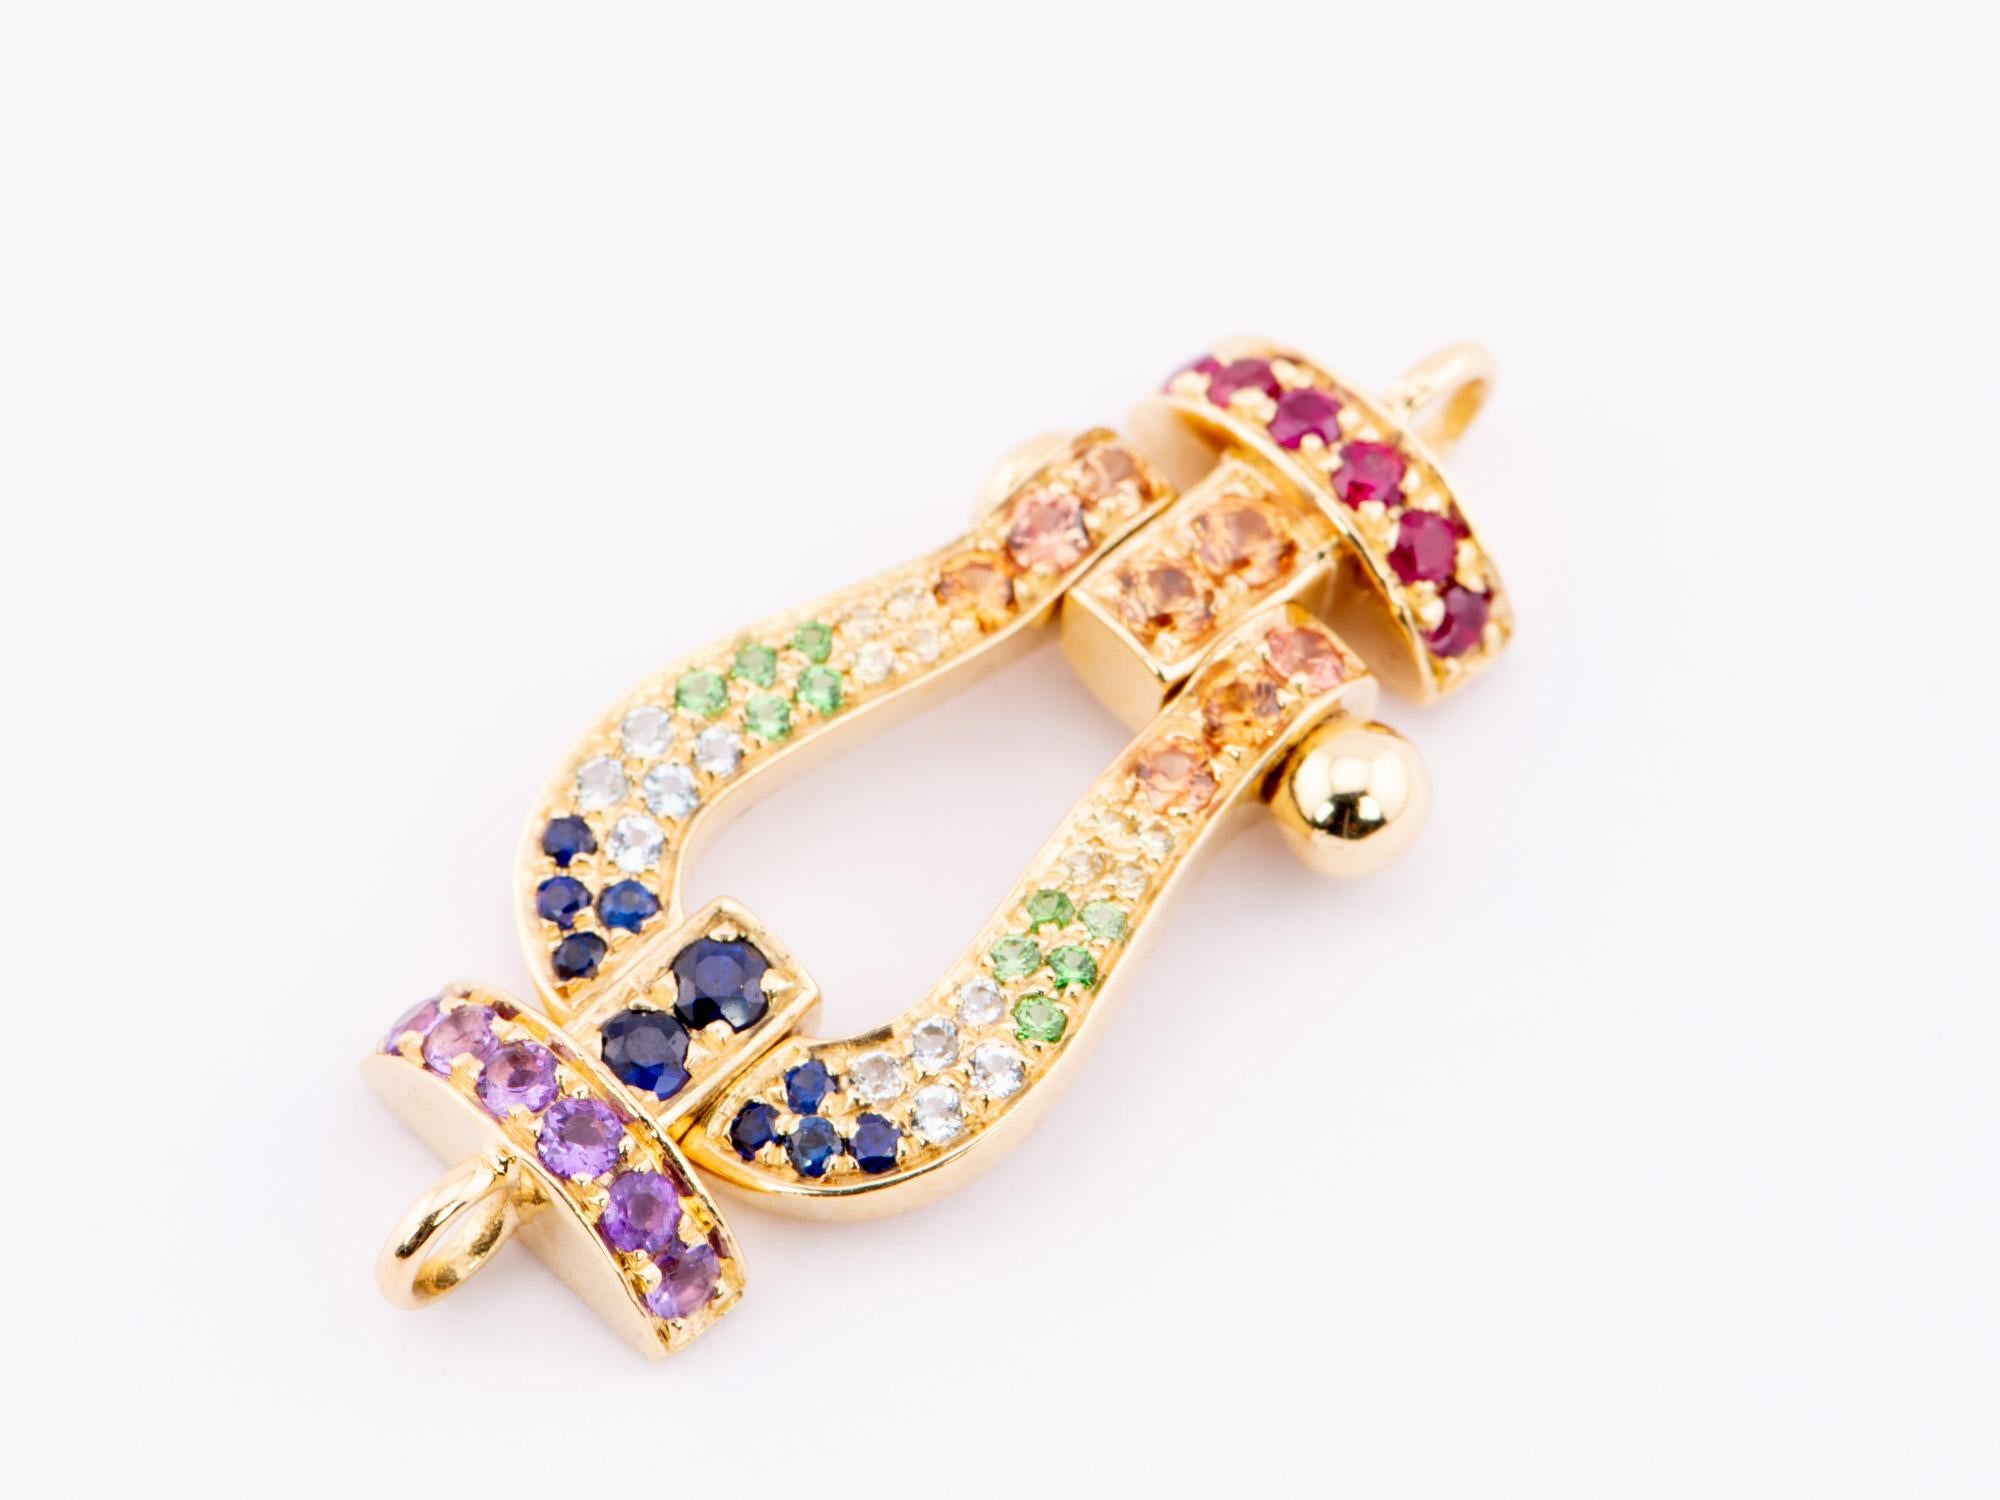 ♥ 18K Gold Rainbow Gemstone Pave Horseshoe Chain Connector Necklace Extender
♥ The item measures 26.6mm in length, 11mm in width, and 3.5mm in height.
♥ Material: 18K Gold
♥ Gemstone: Sapphire 
♥ All stone(s) used are genuine, earth-mined, and